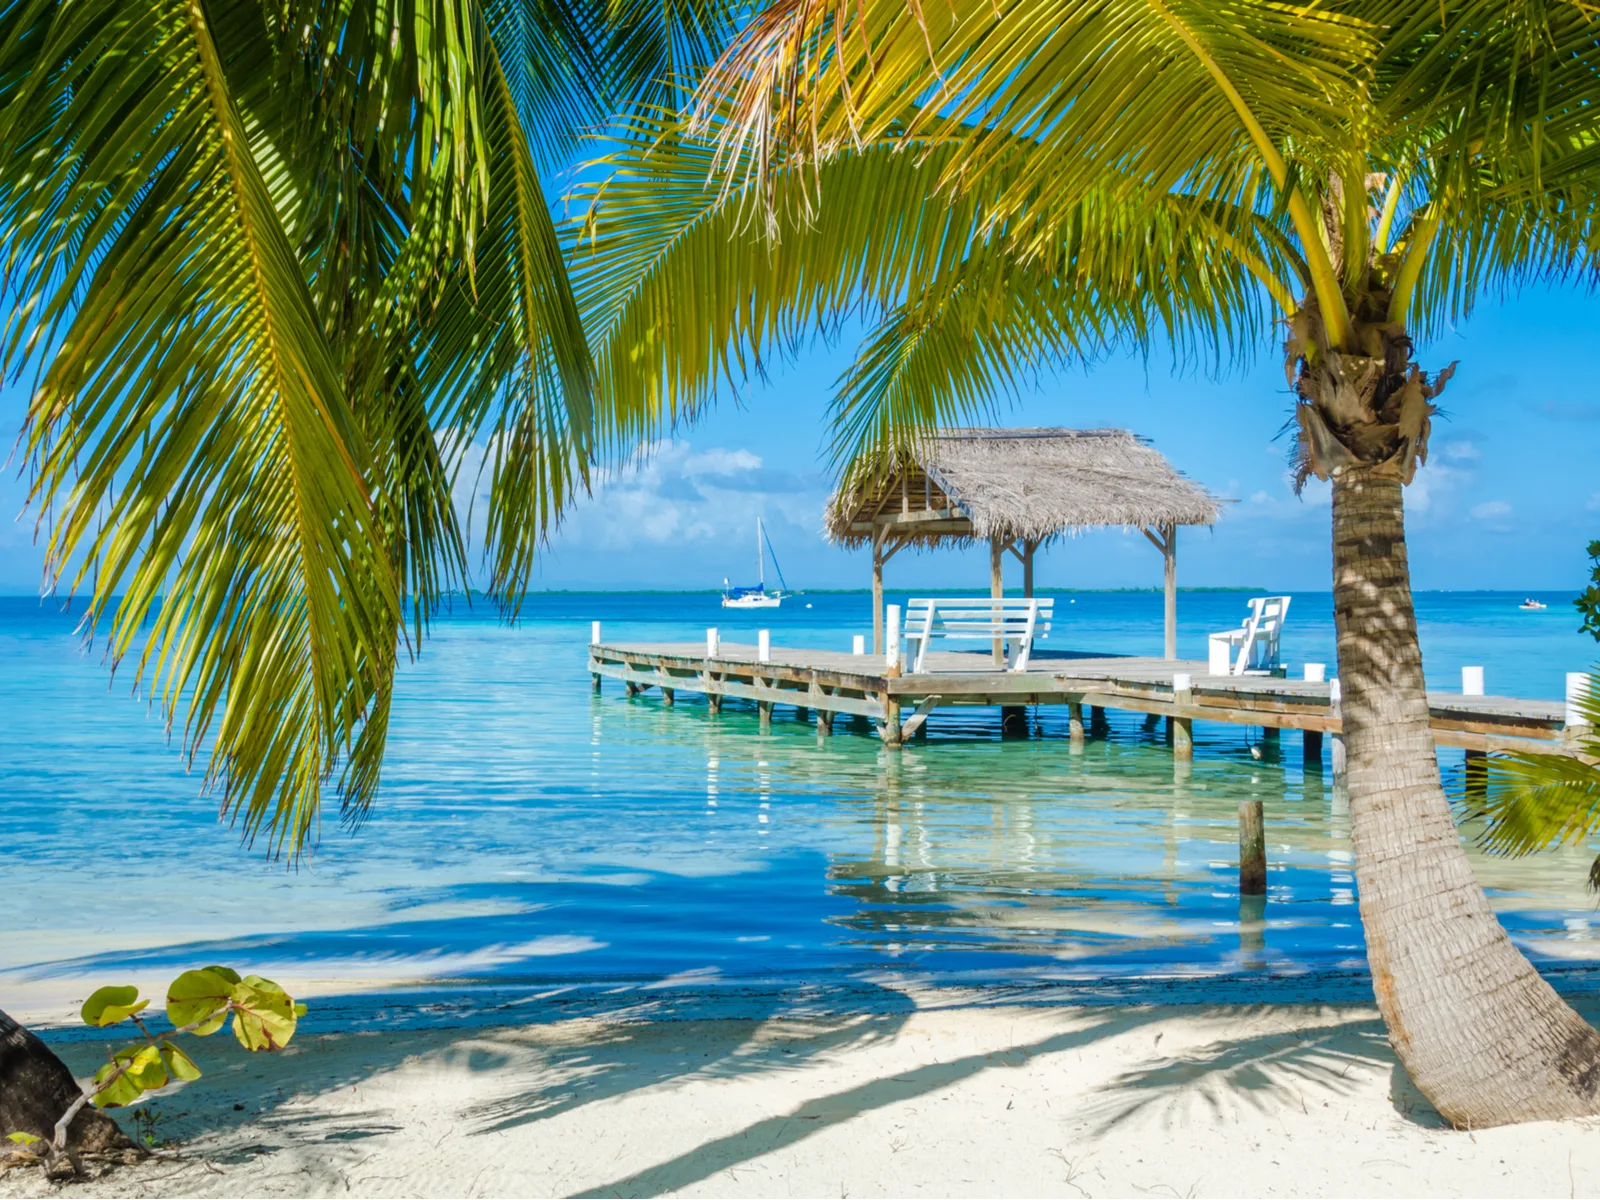 Belize Caye pictured during the cheapest time to visit with a pier jutting into gorgeous teal water